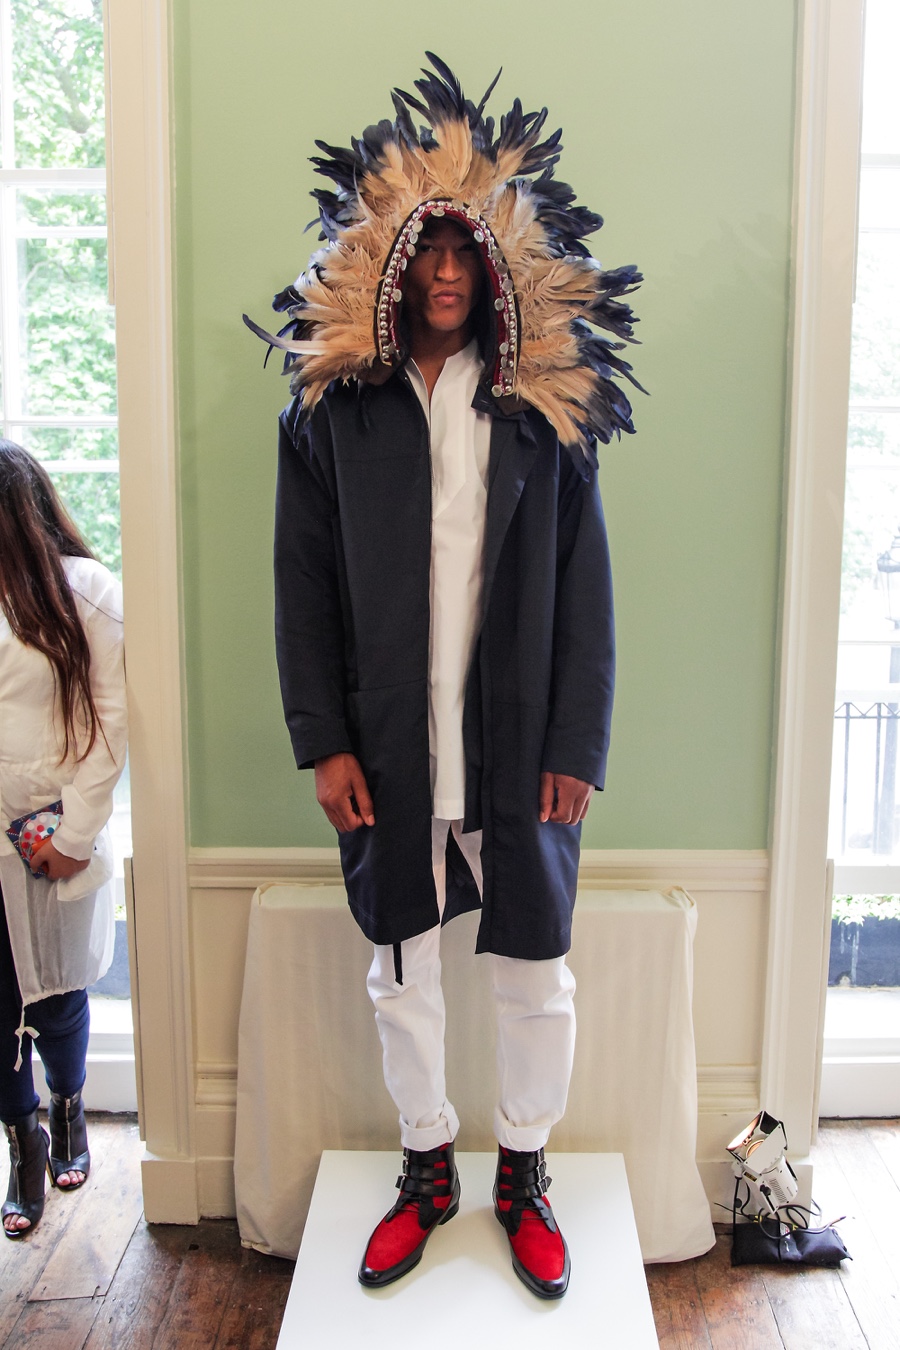 Mr Hare Spring/Summer 2016 | London Collections: Men